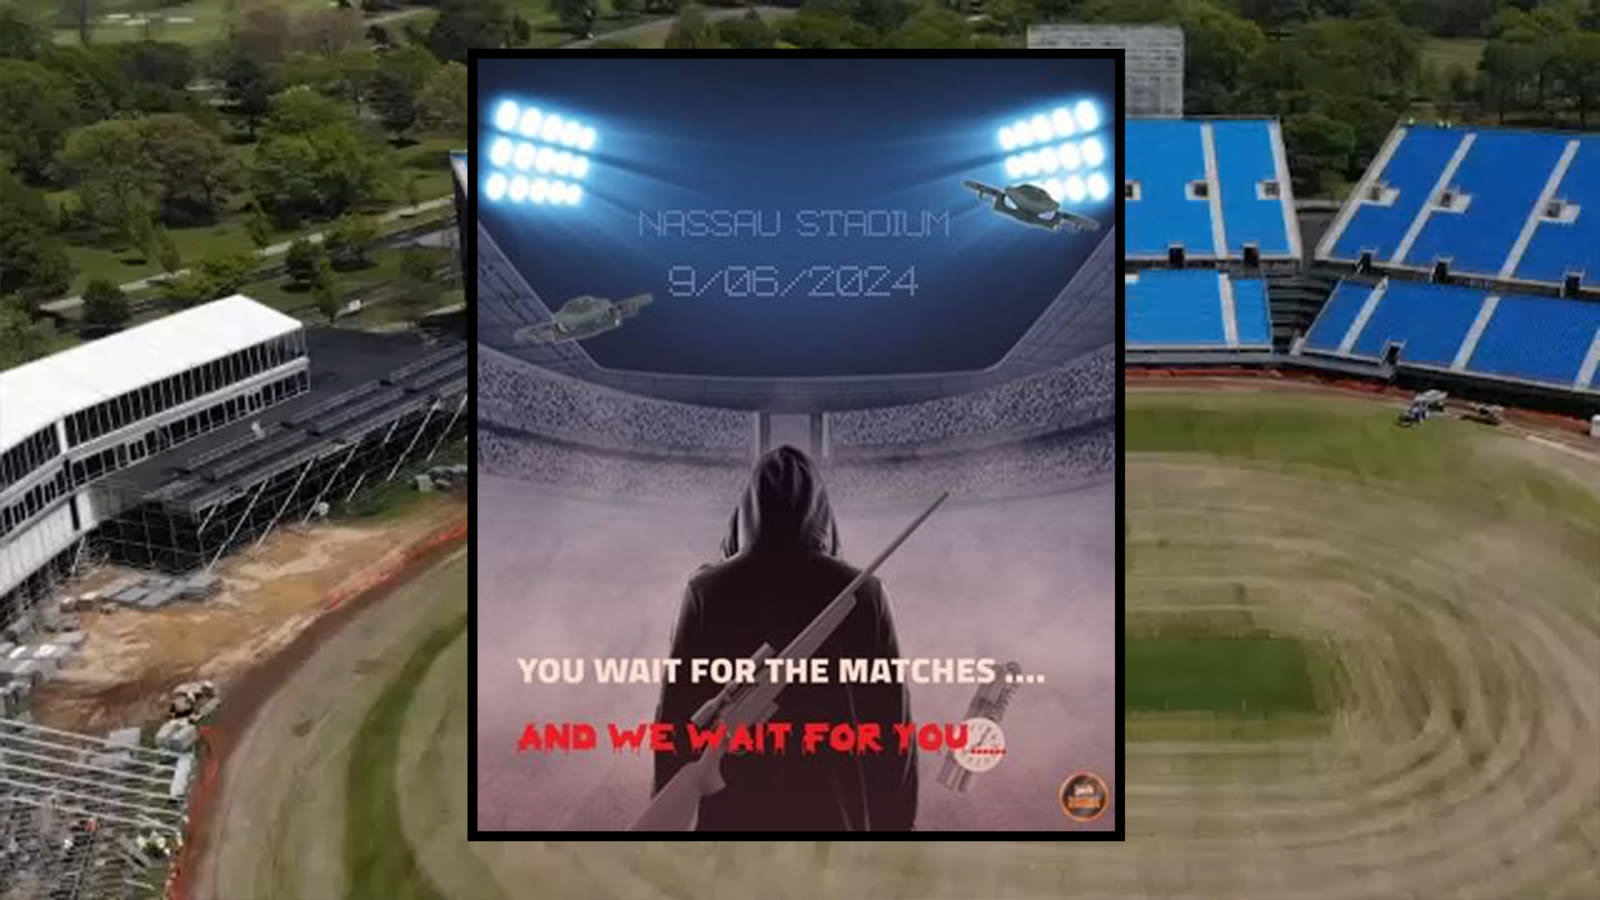 Disturbing flier about Cricket World Cup prompts NYPD terror warning for Nassau County event